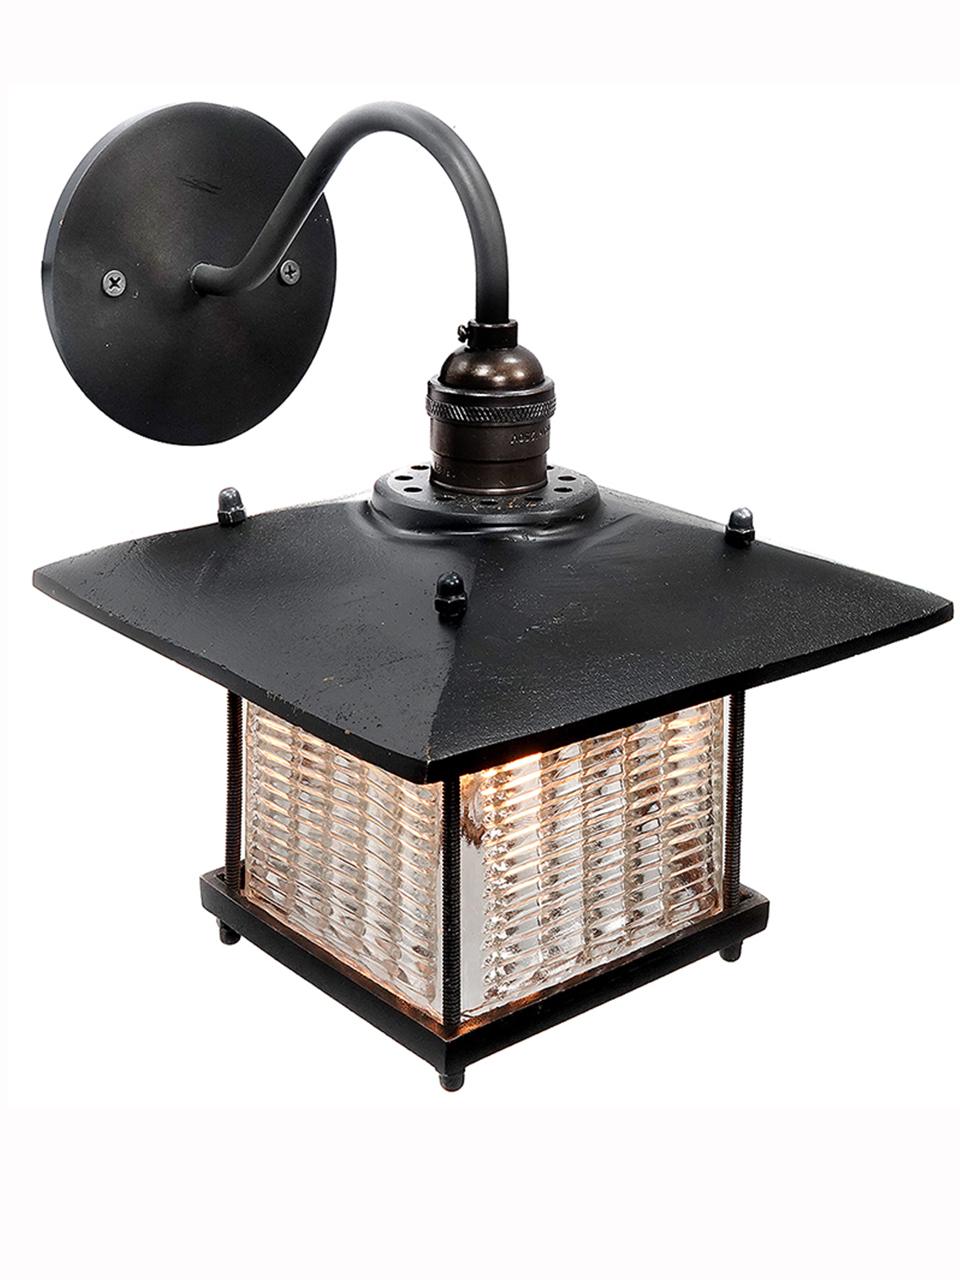 This sconce has a Frank Lloyd Wright feel. The long overhang on the shade has a strong architectural look and goes well with the louvered prismatic glass. The brass is a heavy cast and feels rich. The glass was inspired by early industrial Luxfer